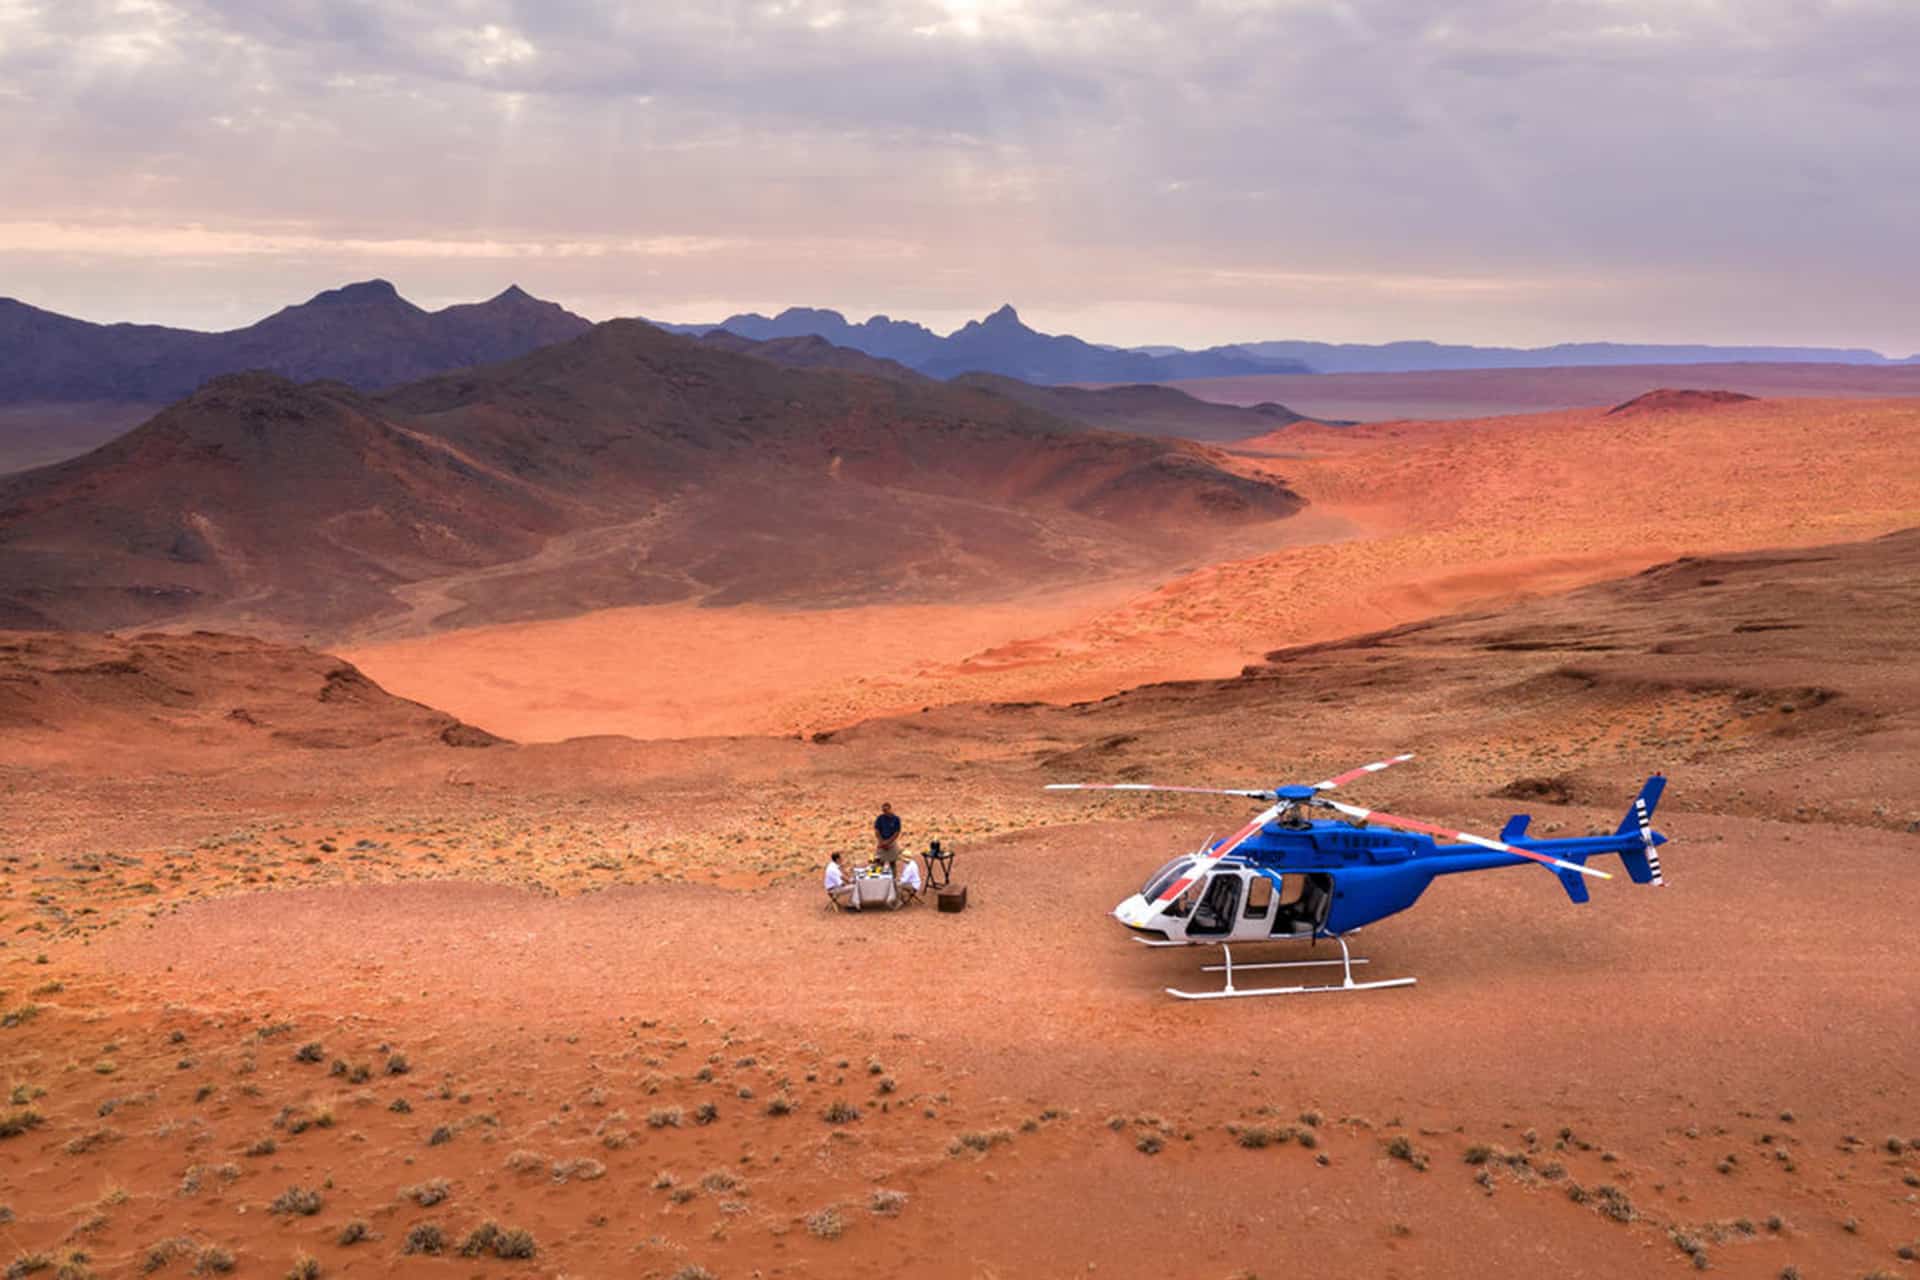 A romantic champagne picnic during a scenic helicopter flip over the desert – a recommended experience for honeymoons in Africa.